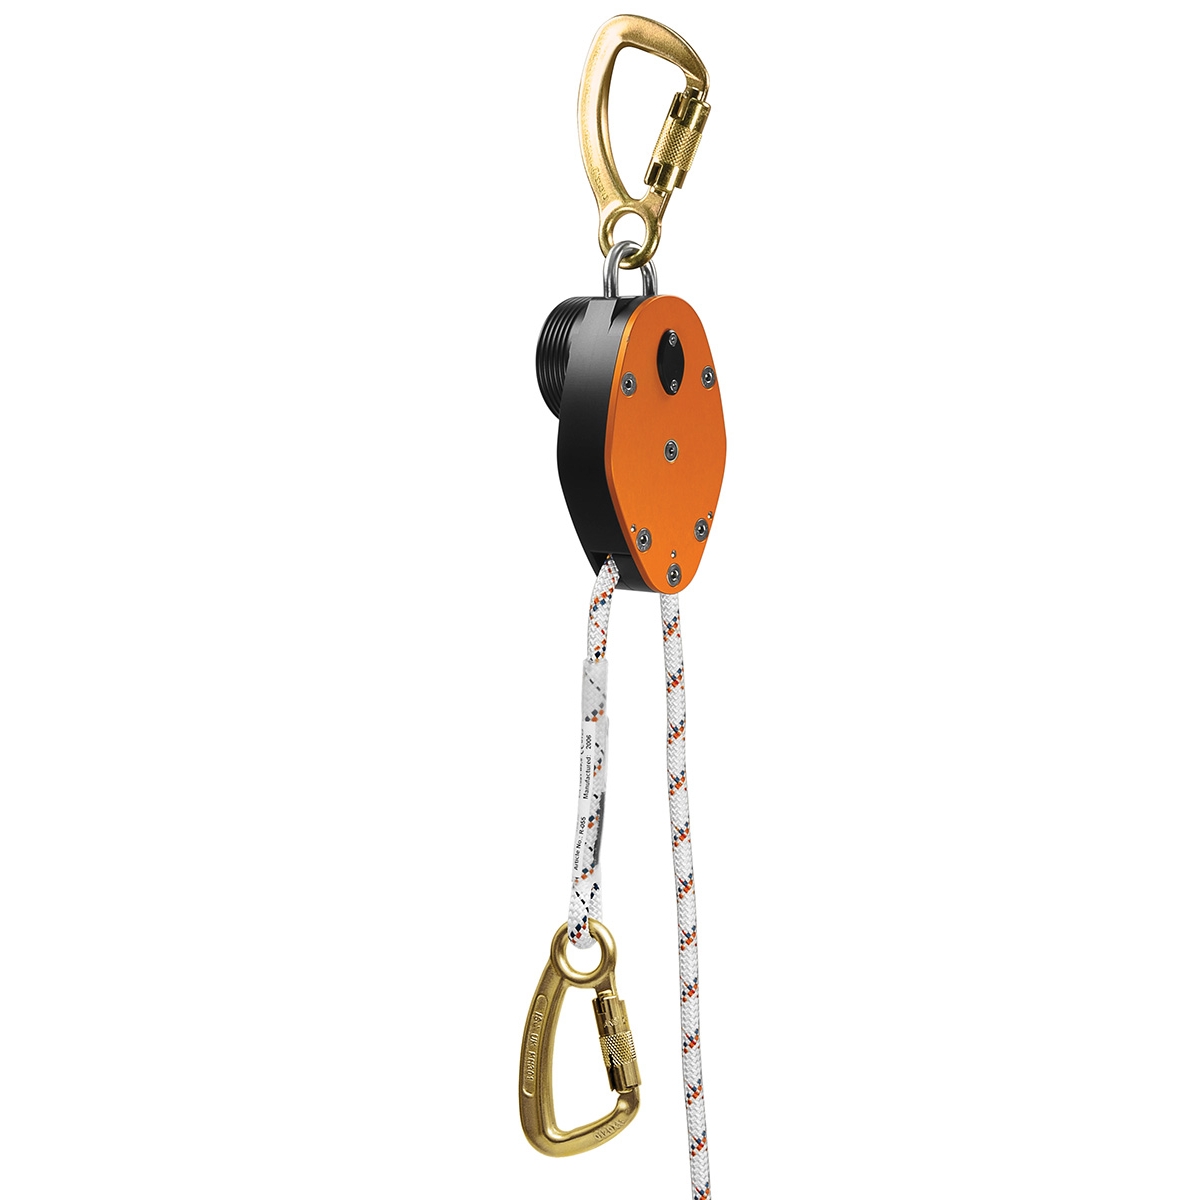 Skylotec Milan 2.0 Controlled Rate Descender Rescue Hub for 11mm Static Rope